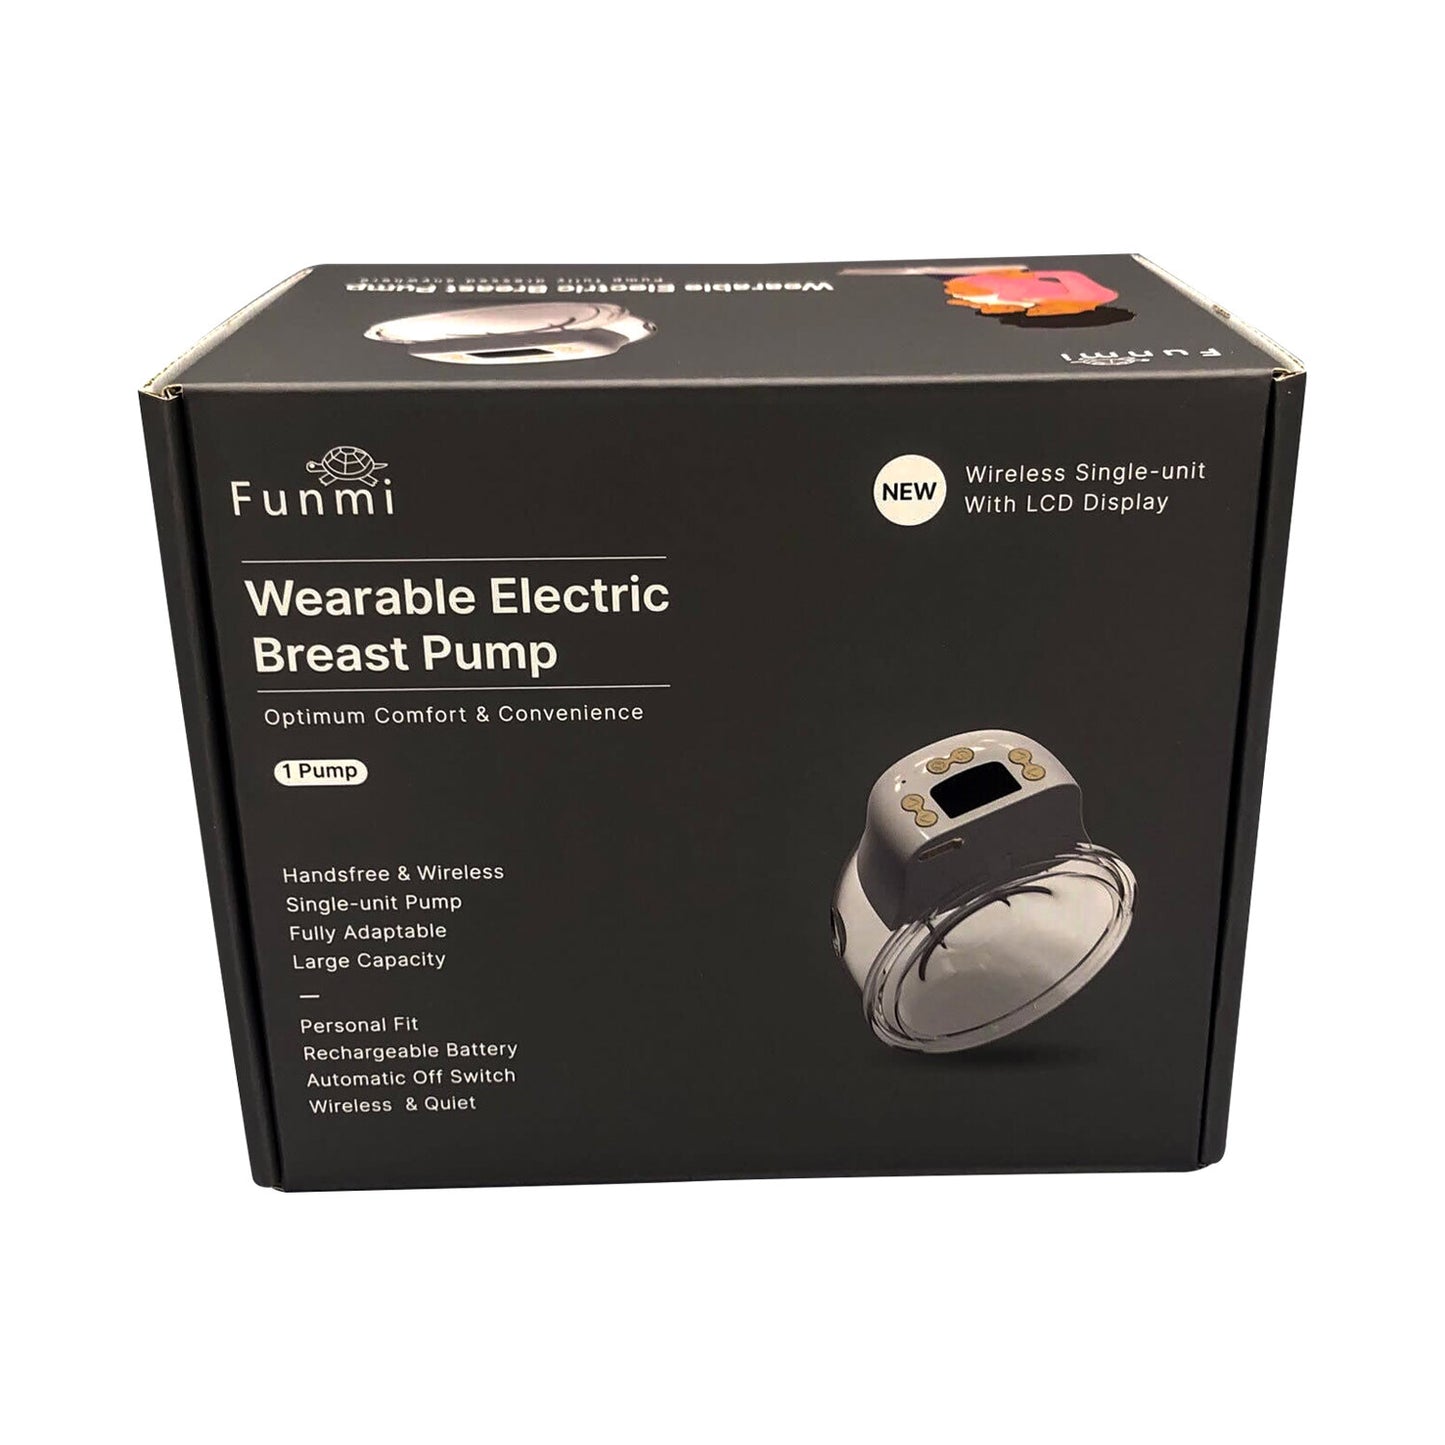 Funmi Wearable Single Electric Breast Pump product packaging